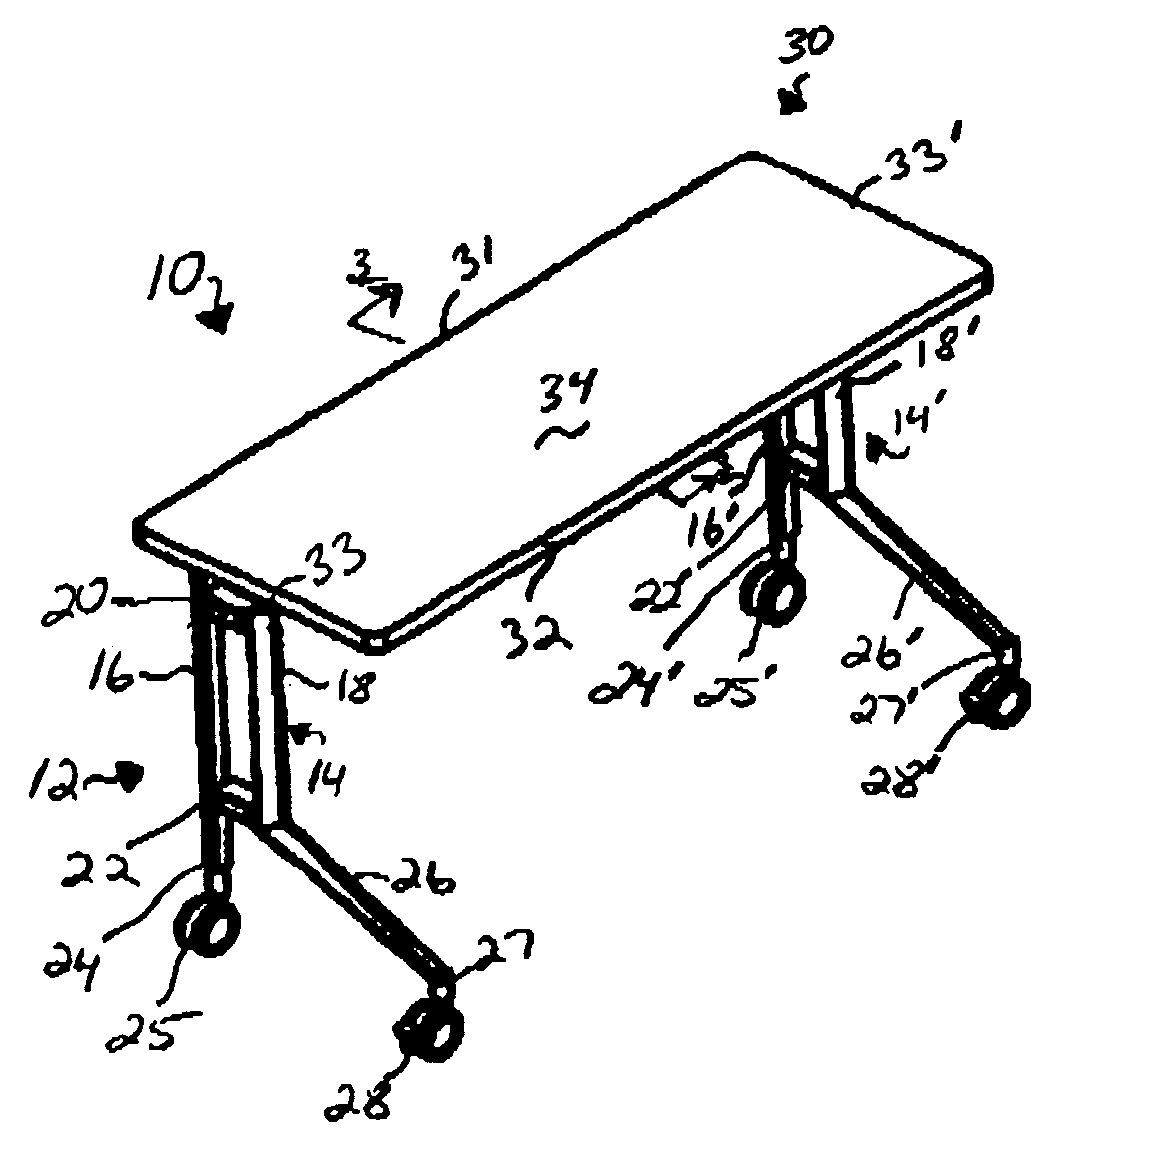 Nesting table with controlled pivoting movement